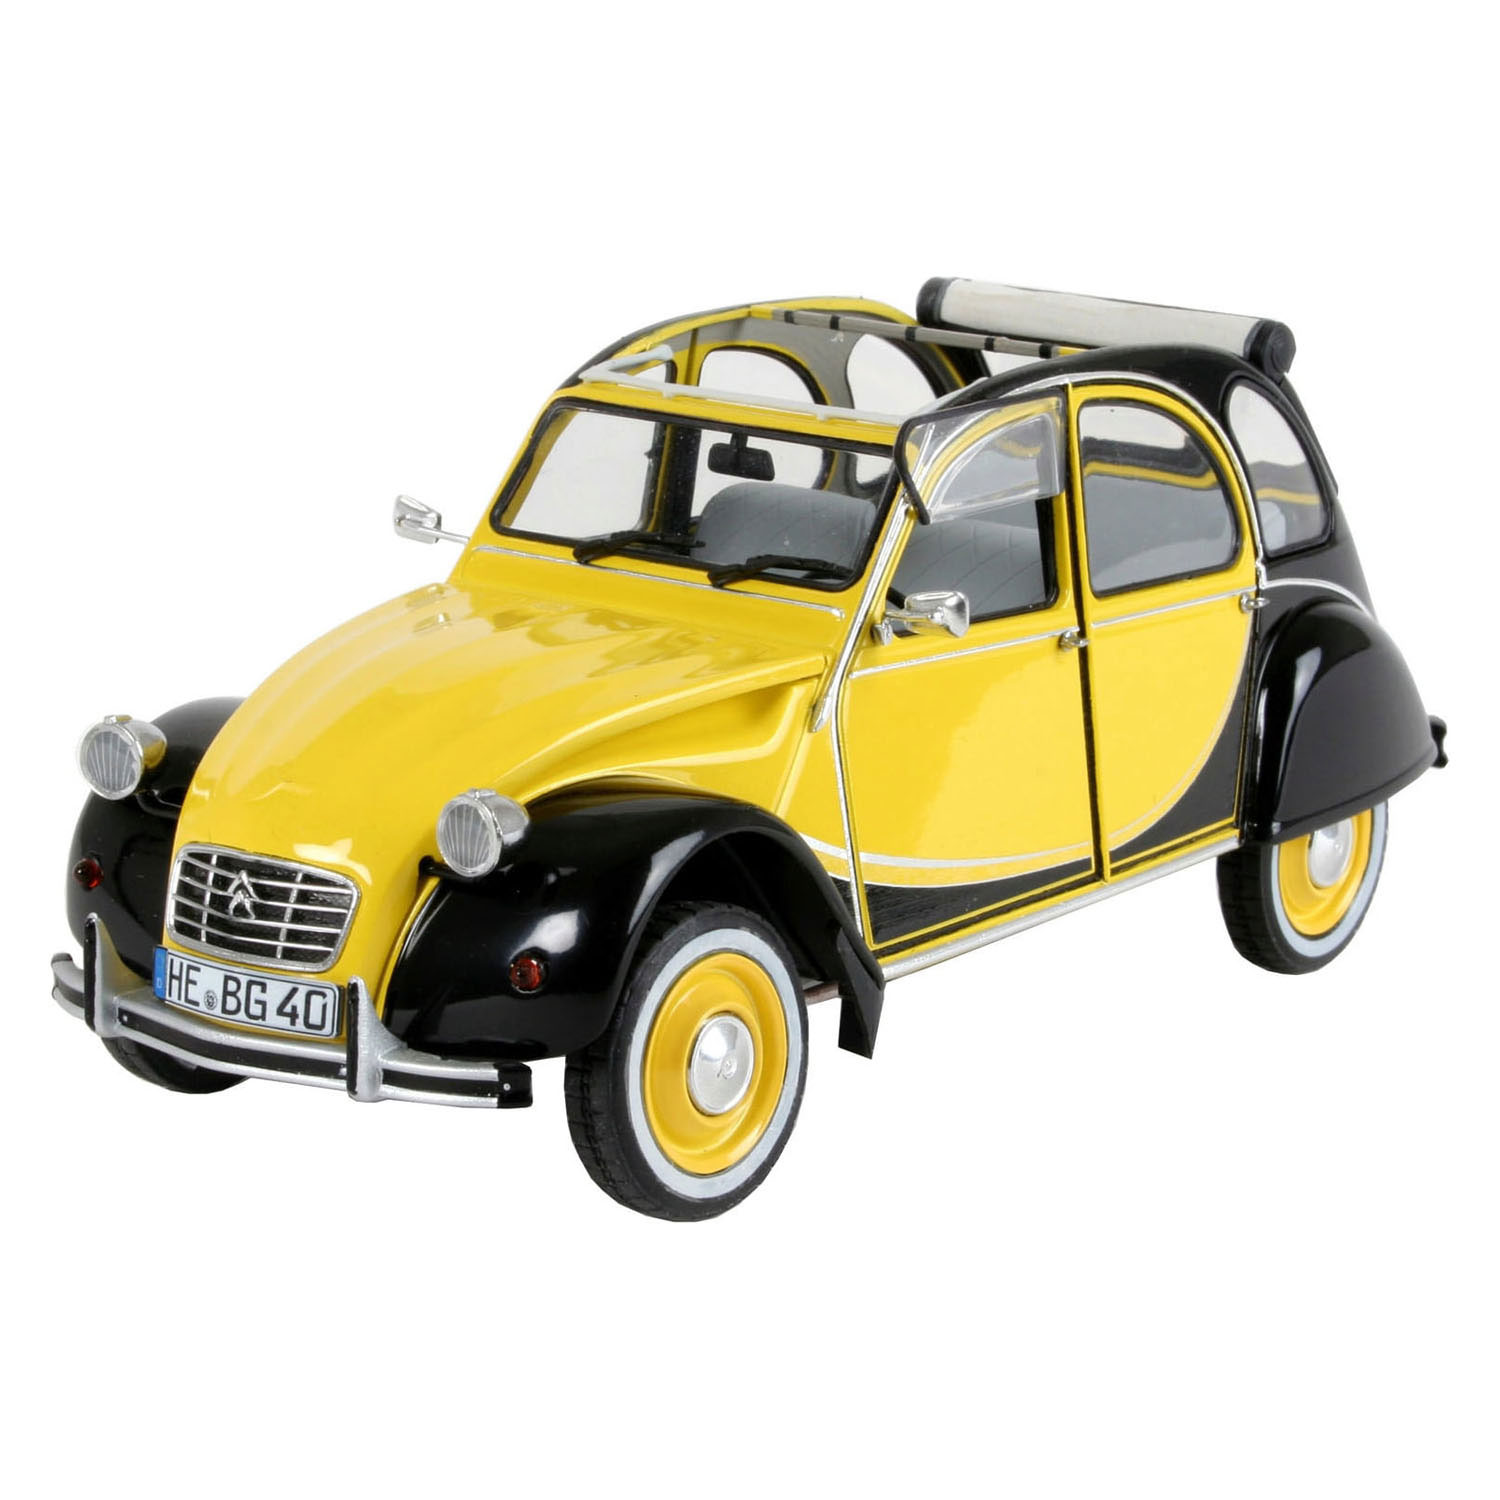 CITROËN AND PLAYMOBIL PARTNER TO CREATE THE CITROËN 2CV PLAYMOBIL SET, Citroën